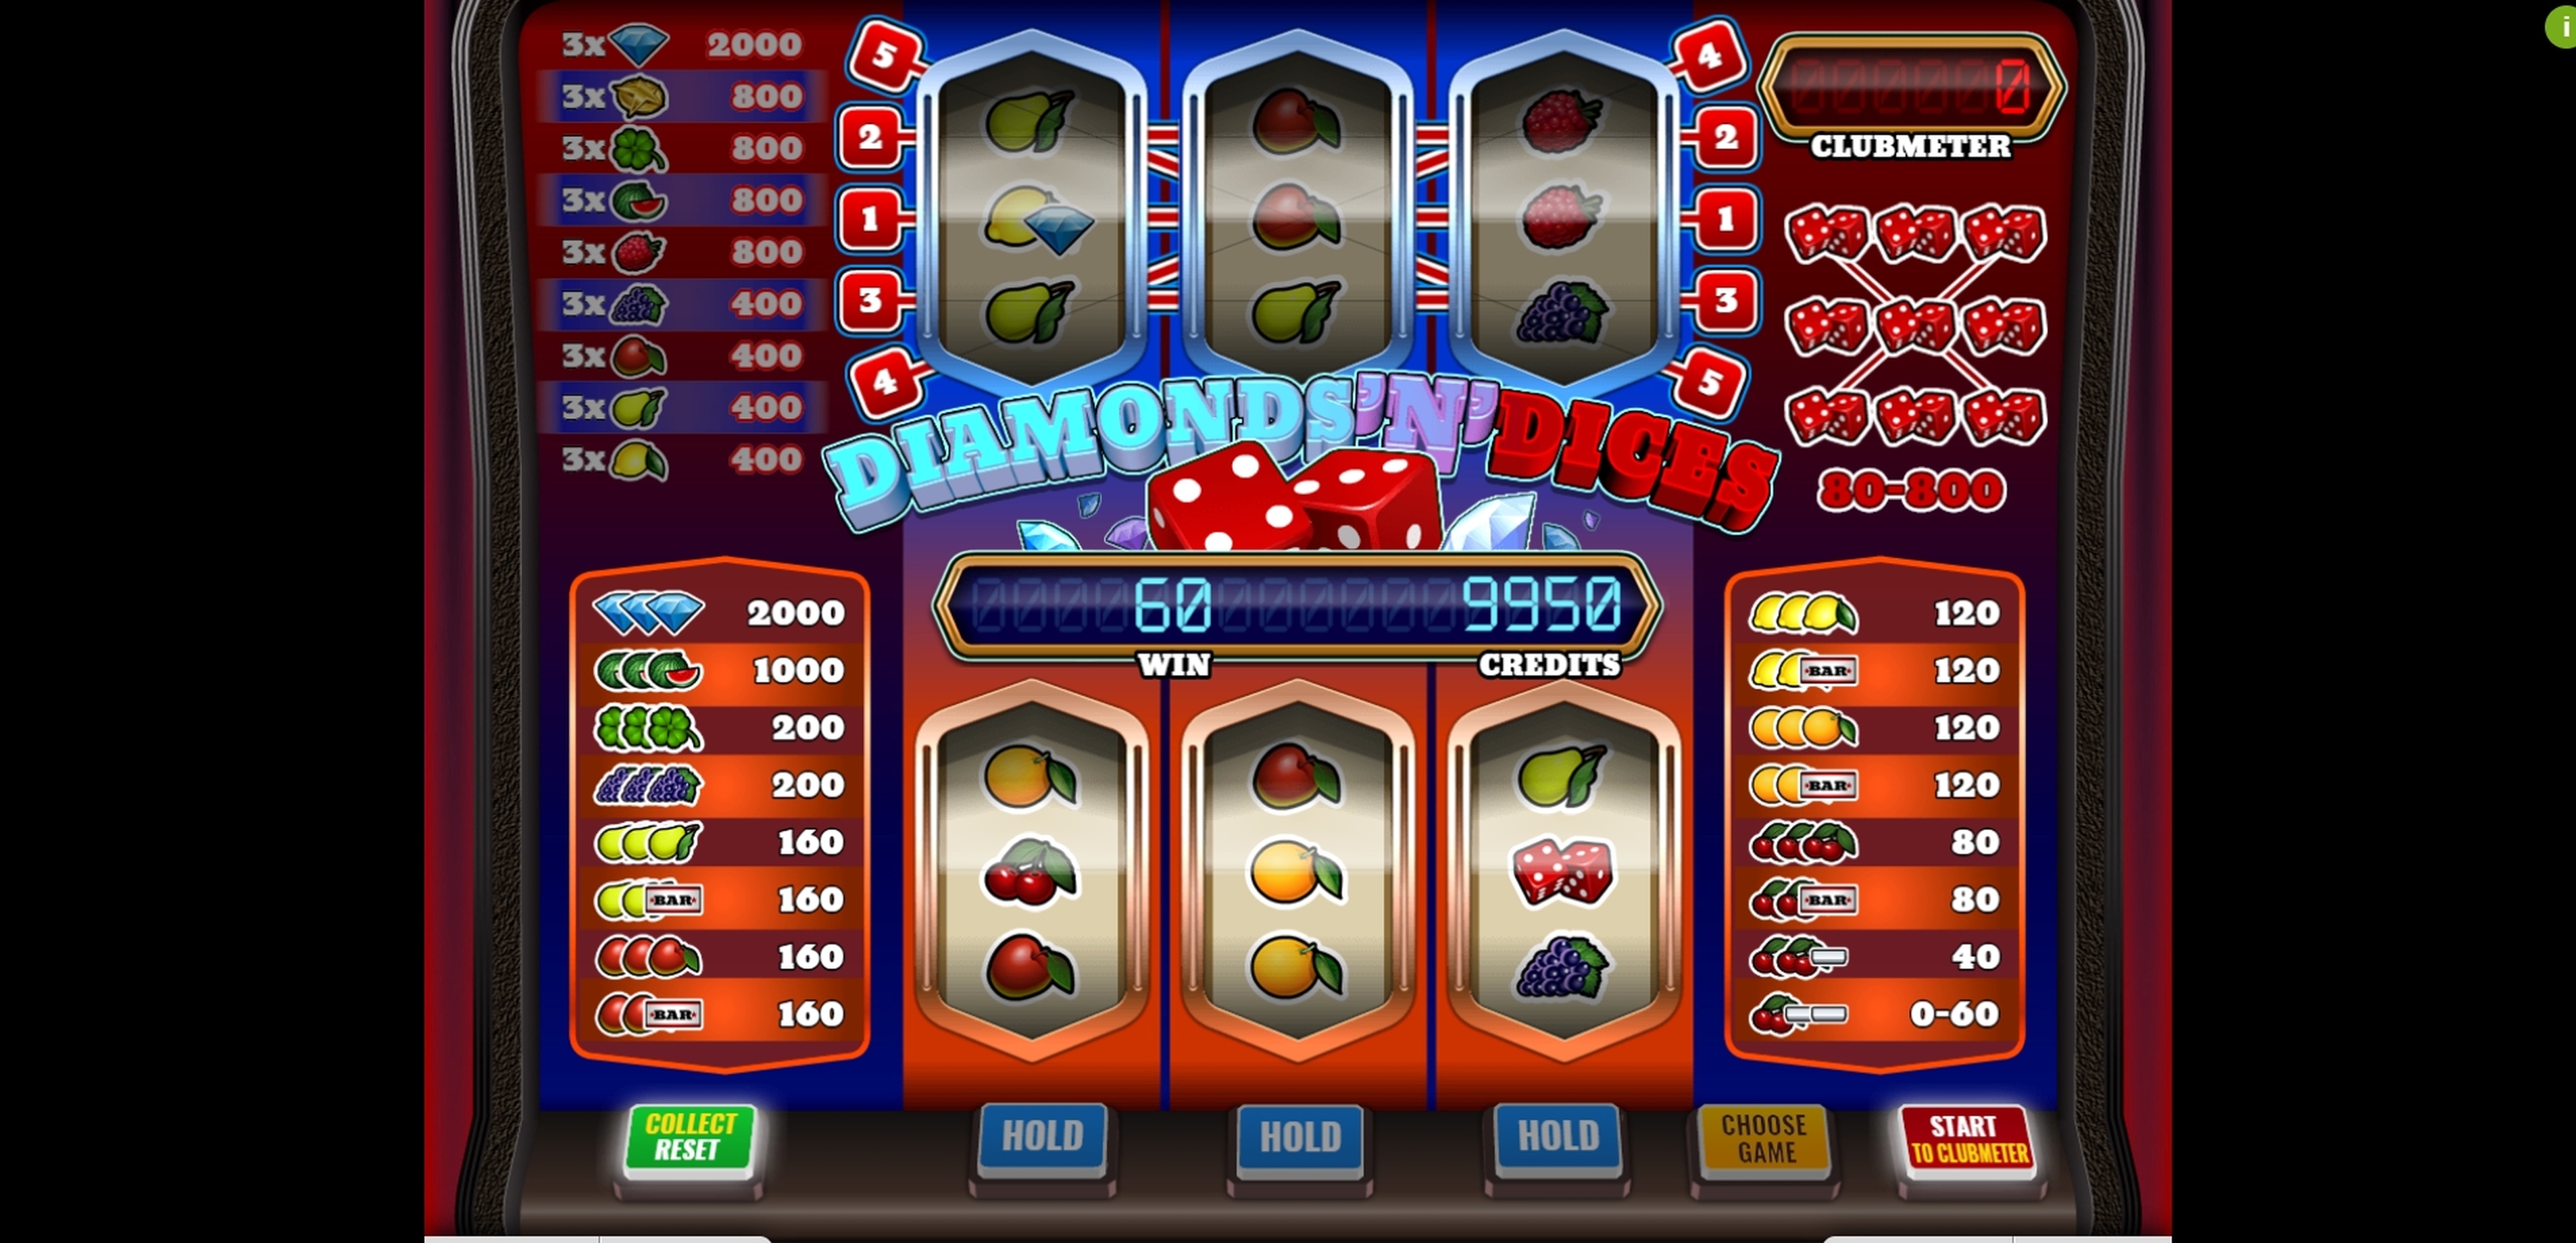 Win Money in Diamonds 'N' Dices Free Slot Game by Imagina